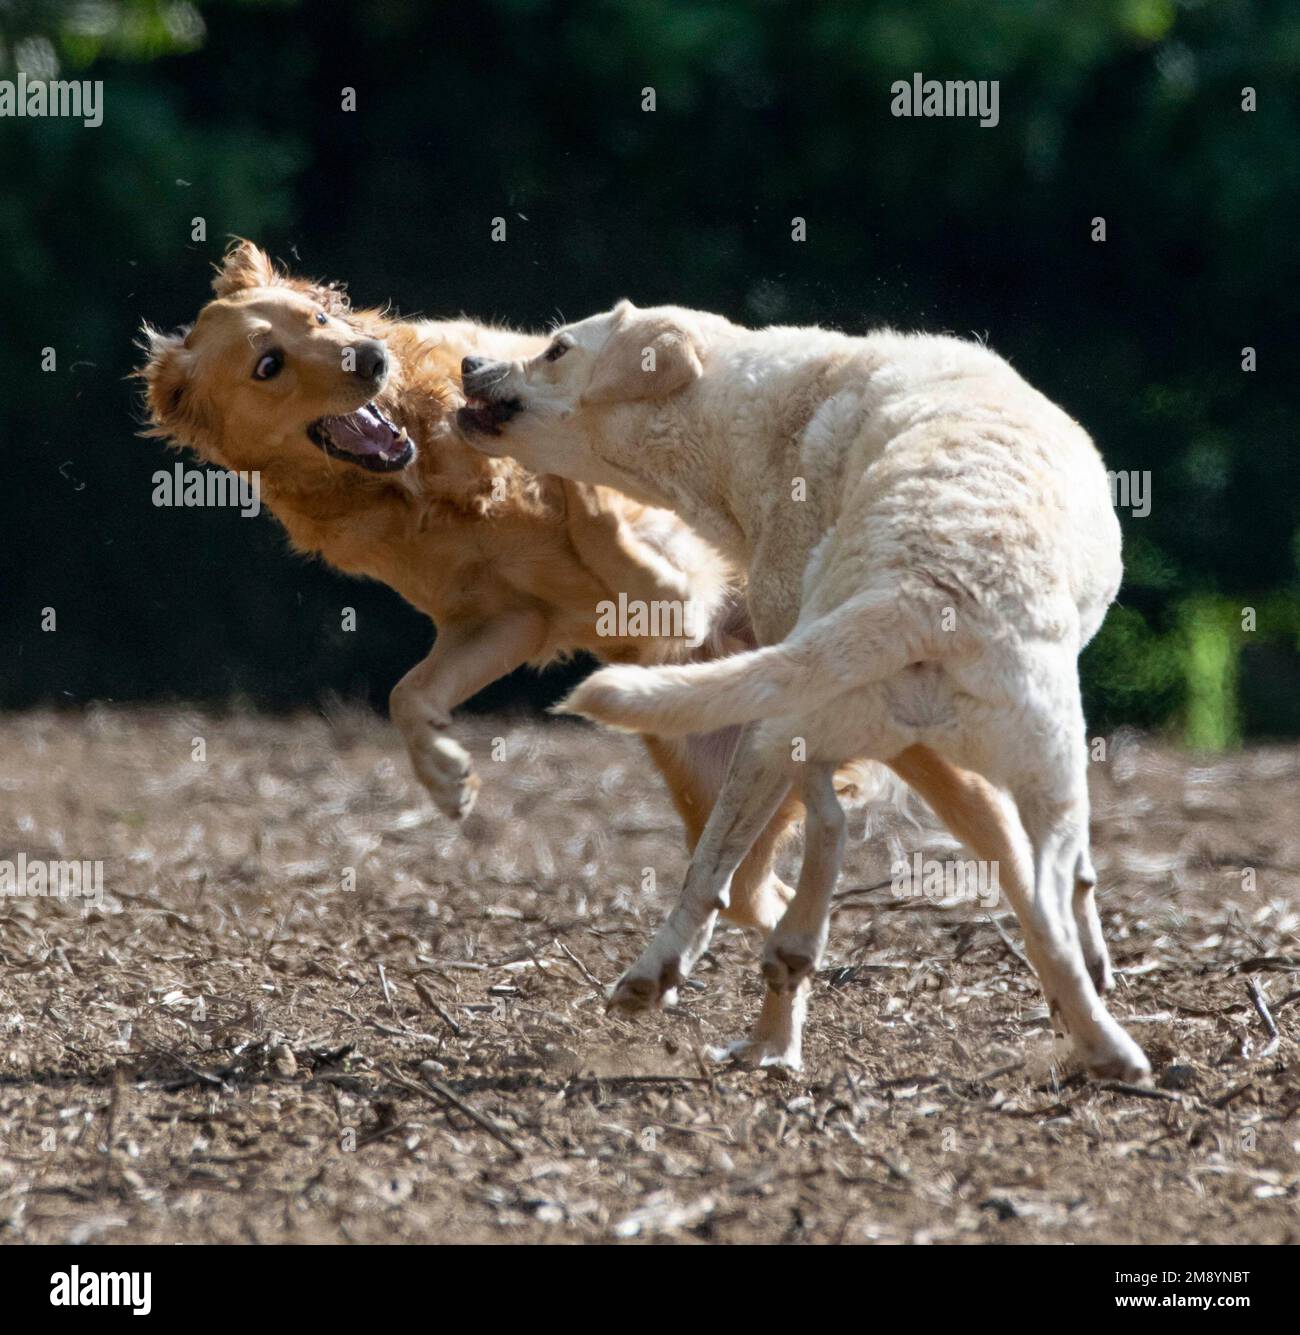 Two dogs having a friendly fight Stock Photo